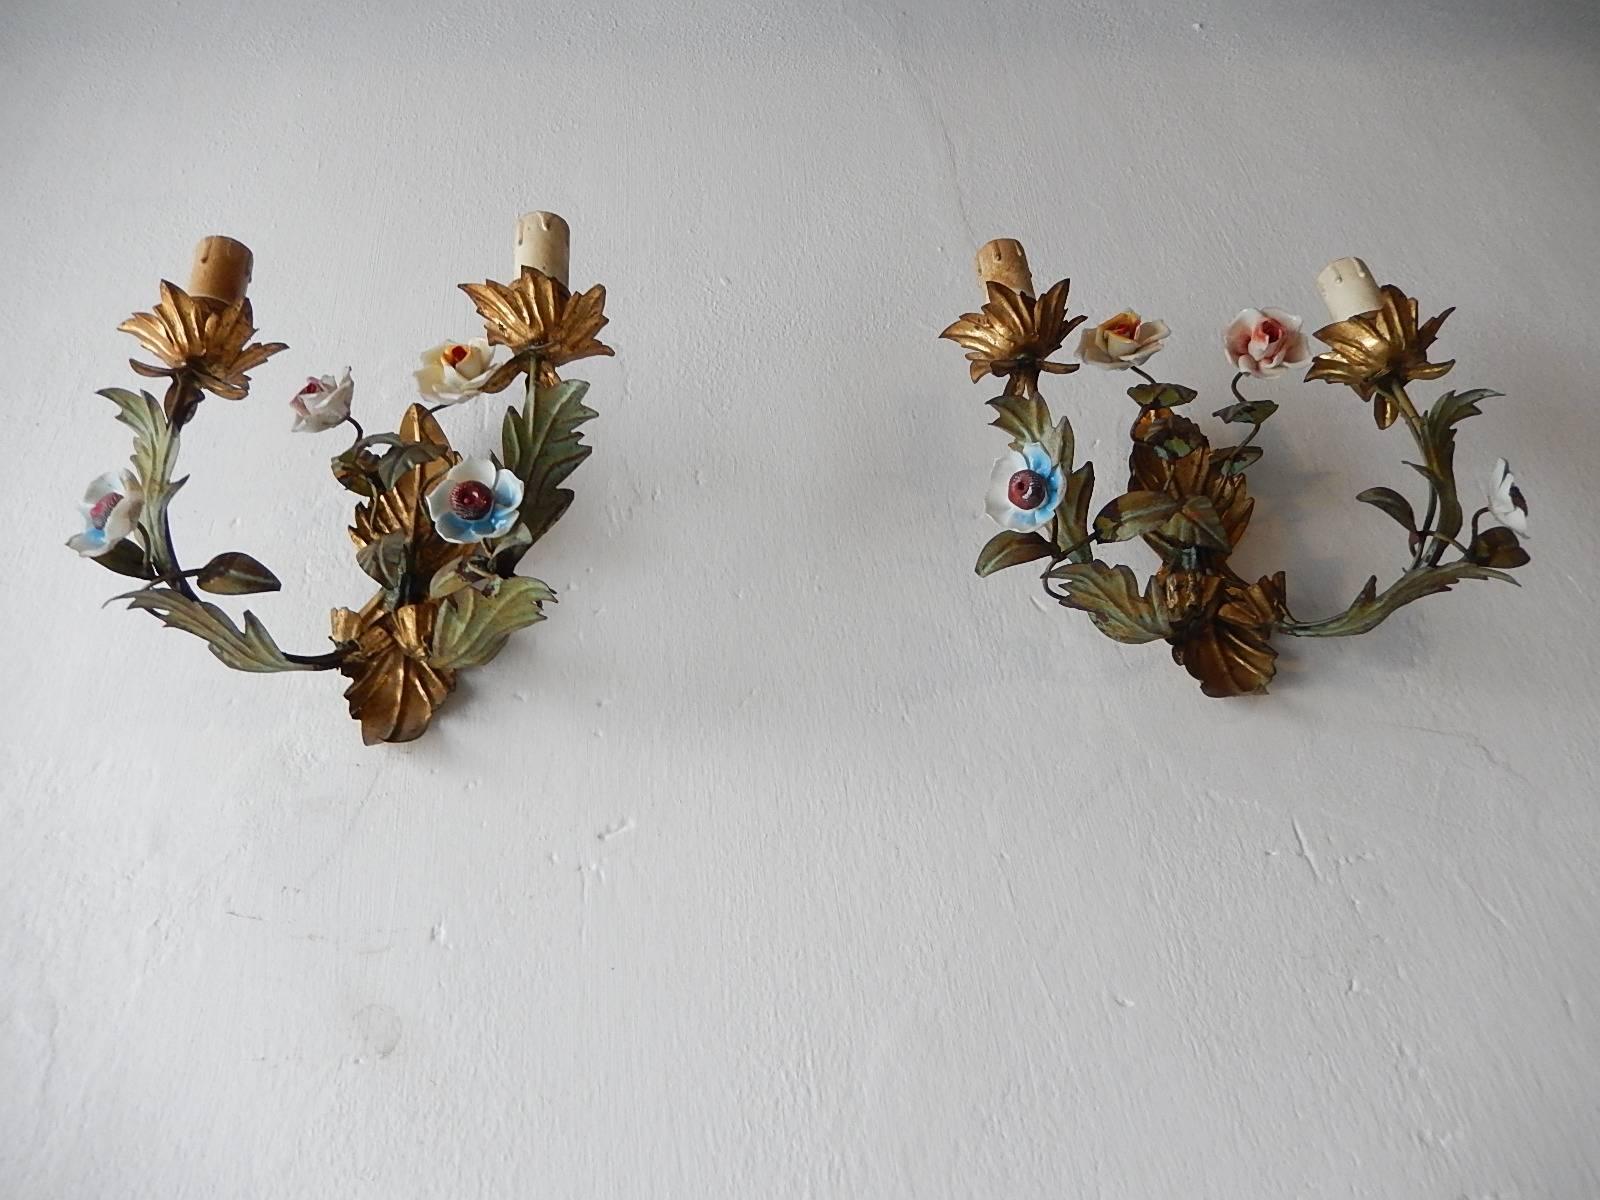 Housing two lights each. Gilt tole details. Original color tole. Handmade porcelain roses and flowers some chipping and flea bites as shown. Re-wired and ready to hang. Free priority shipping from Italy.